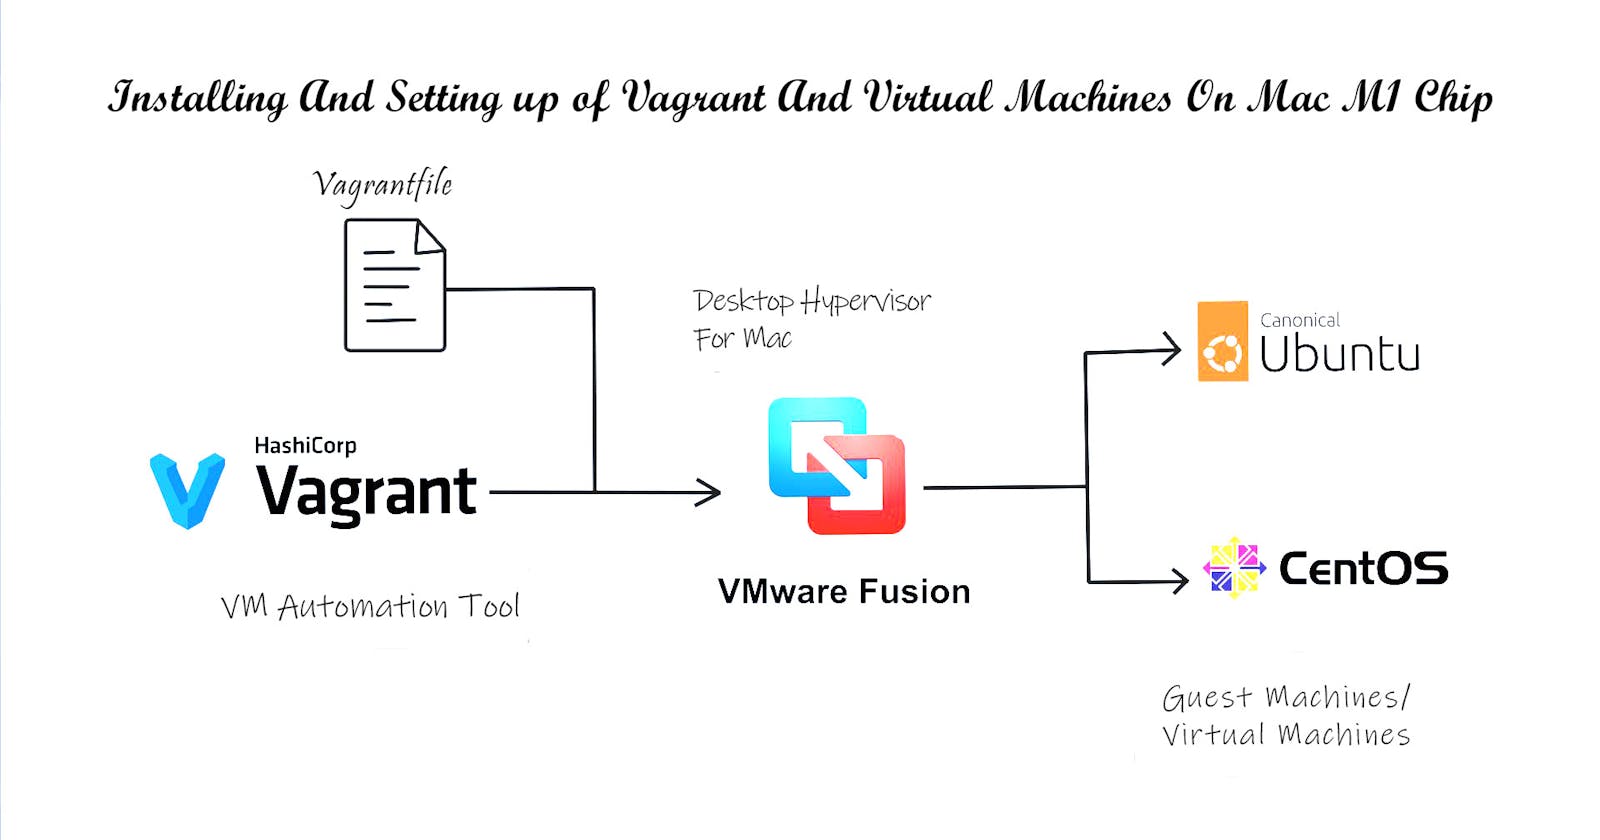 How To Install And Setup Vagrant And Virtual Machines On Mac M1 Chip.